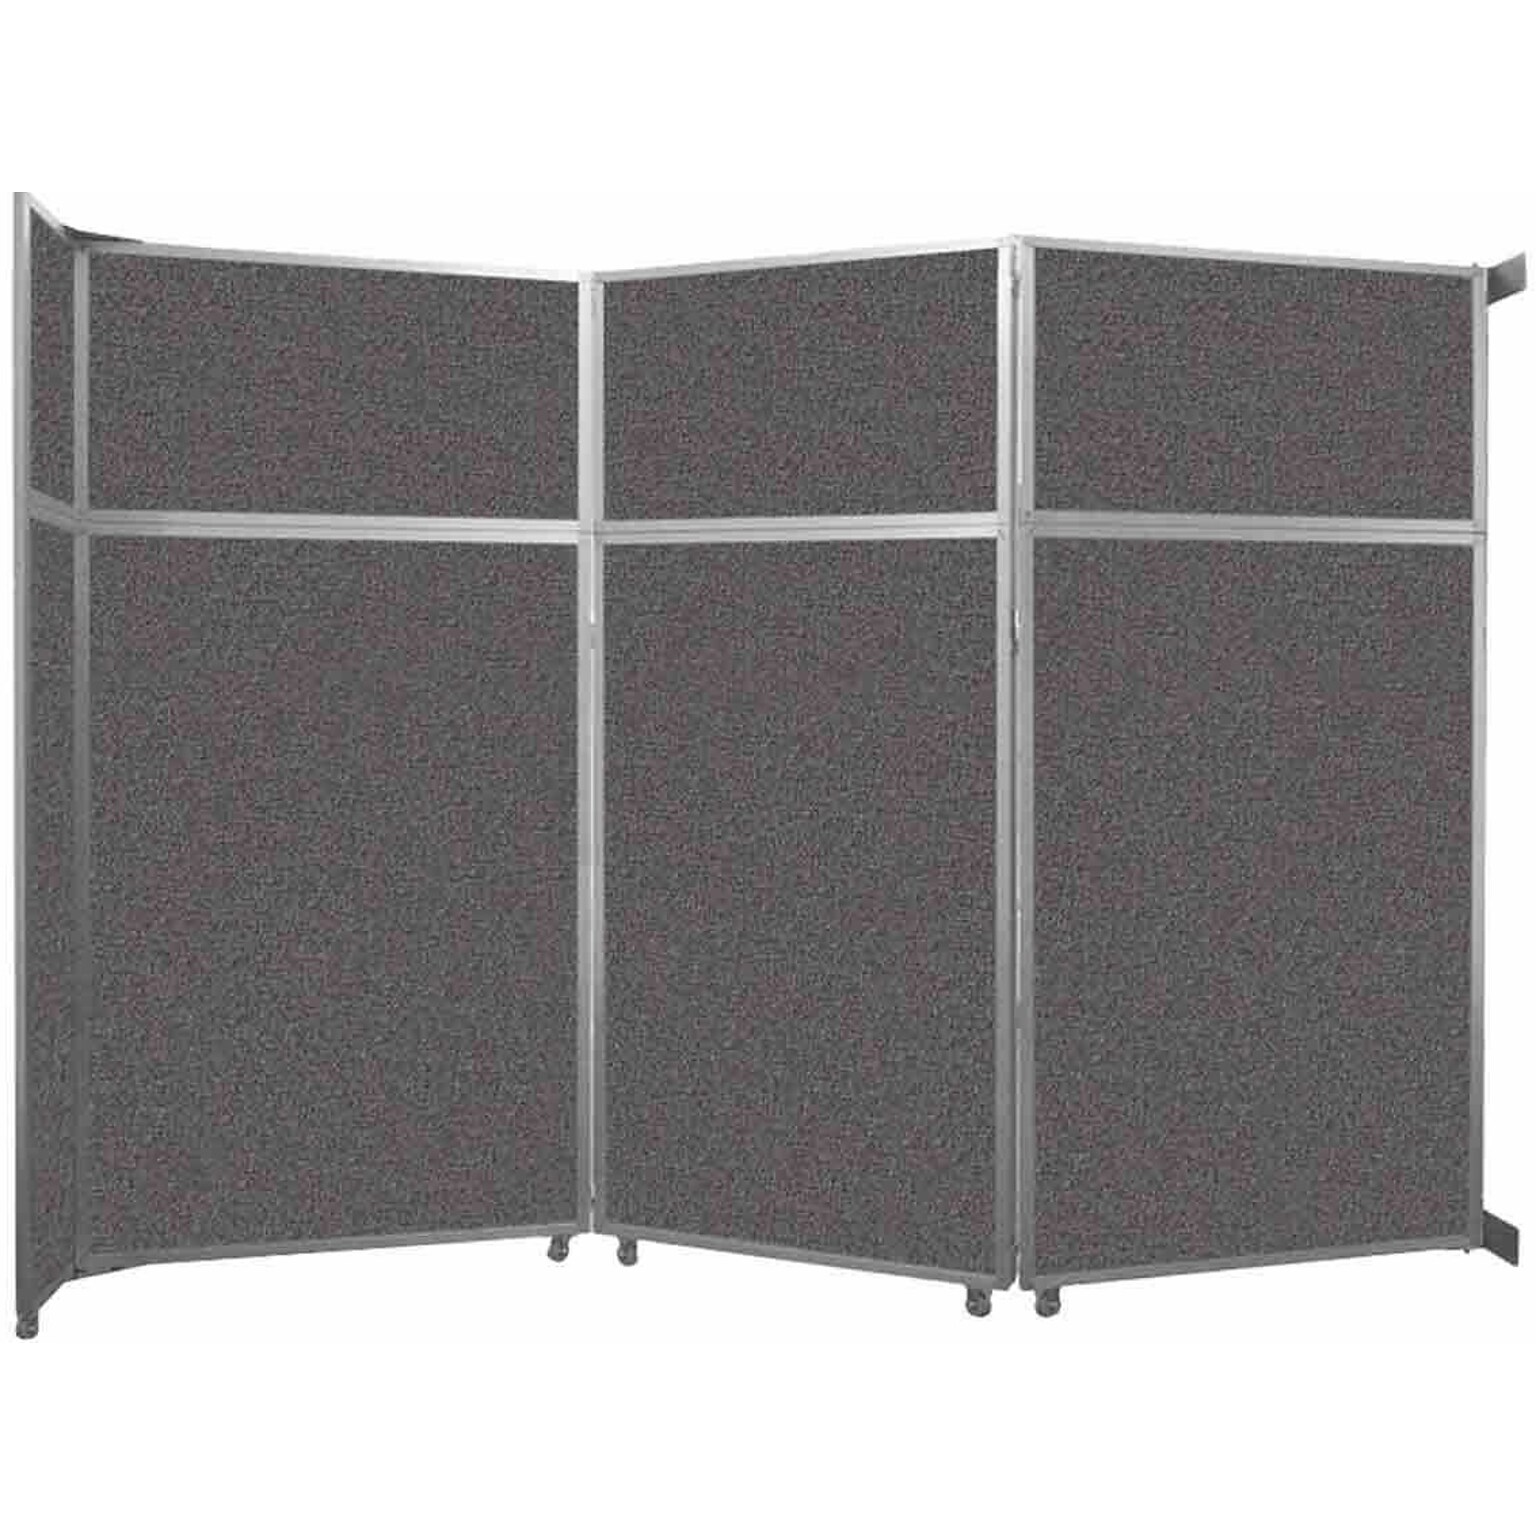 Versare Operable Wall Clamp Mount Folding Room Divider, 101.25H x 141W, Charcoal Gray Fabric (1070307)